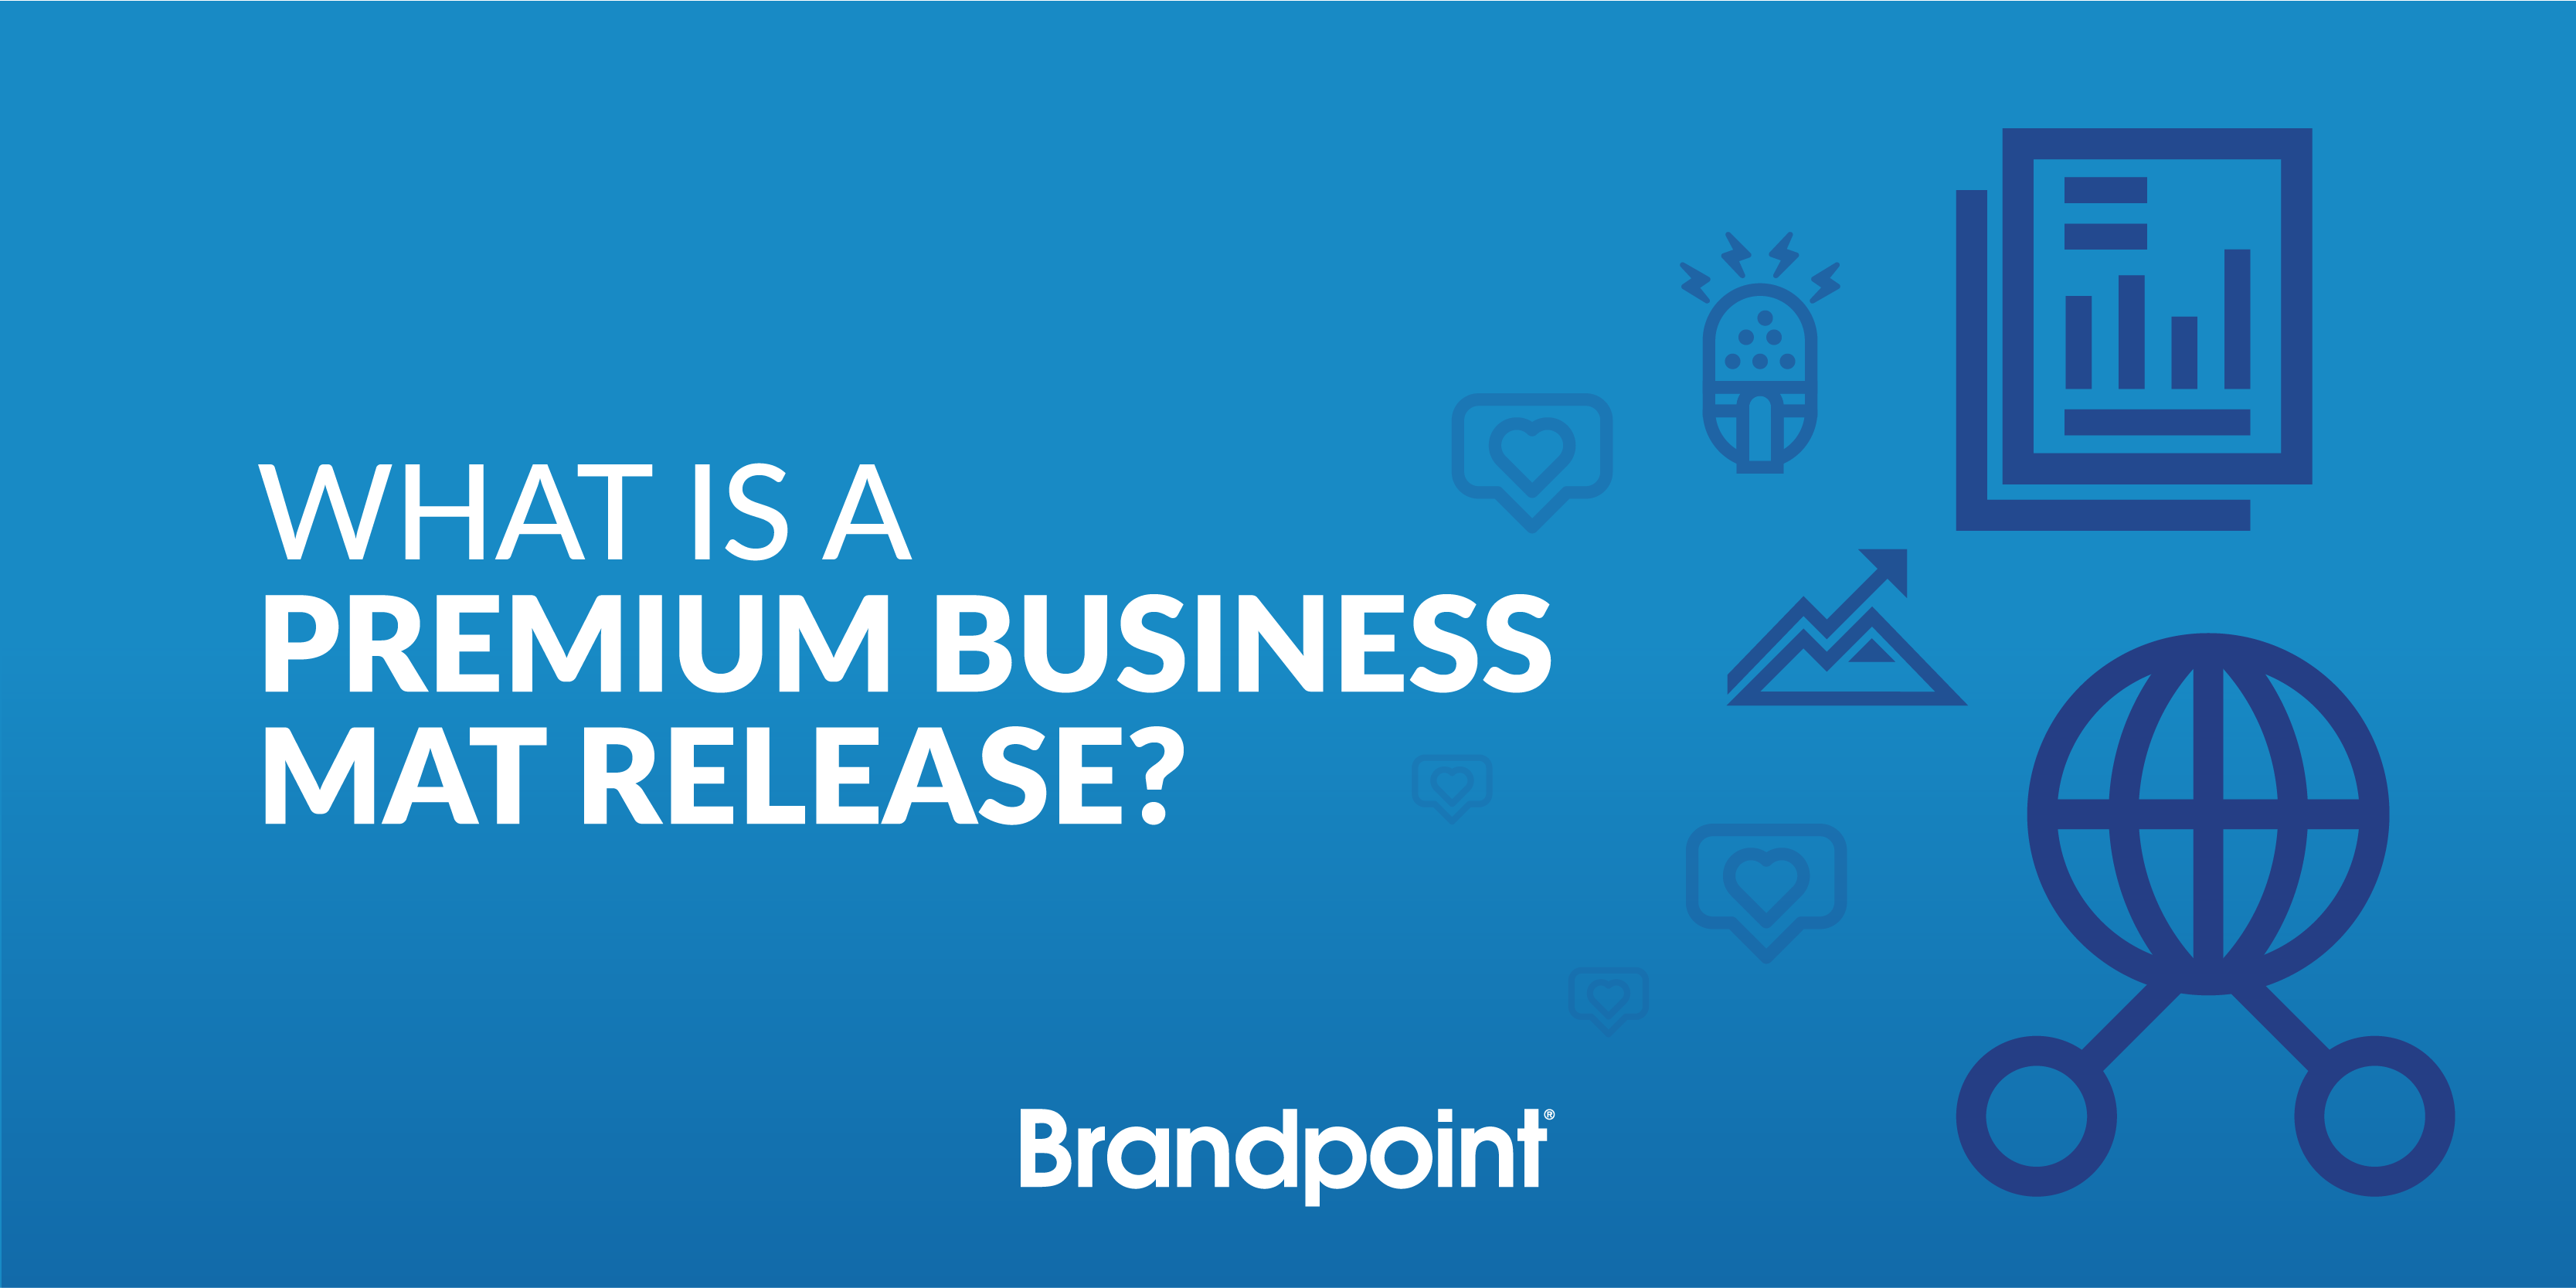 what is a premium business mat release?